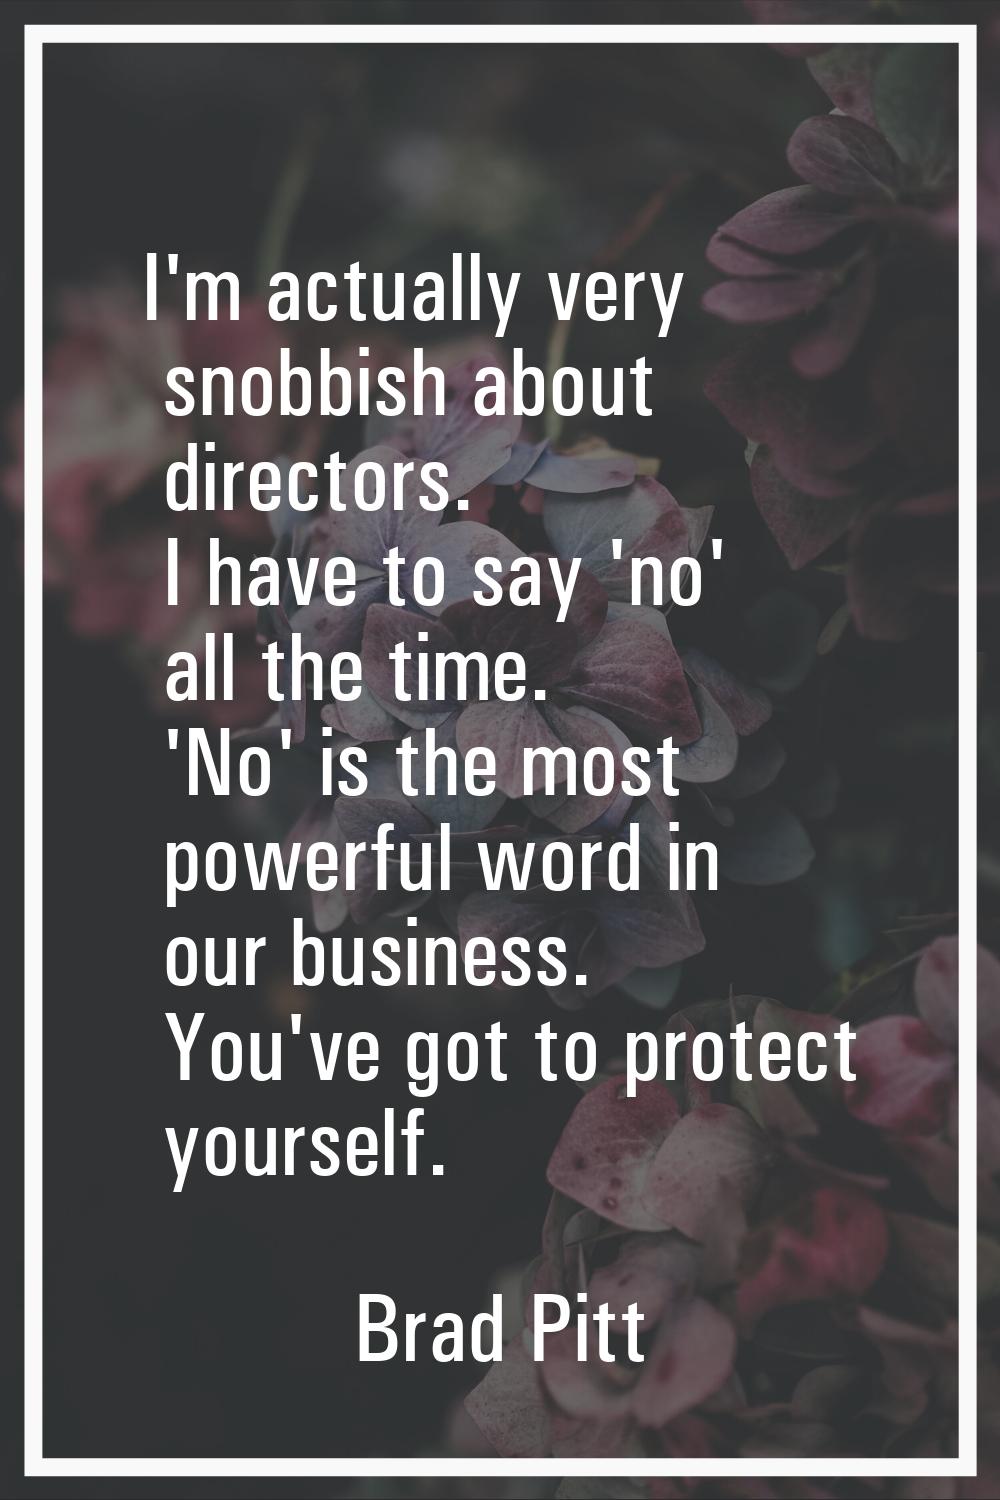 I'm actually very snobbish about directors. I have to say 'no' all the time. 'No' is the most power